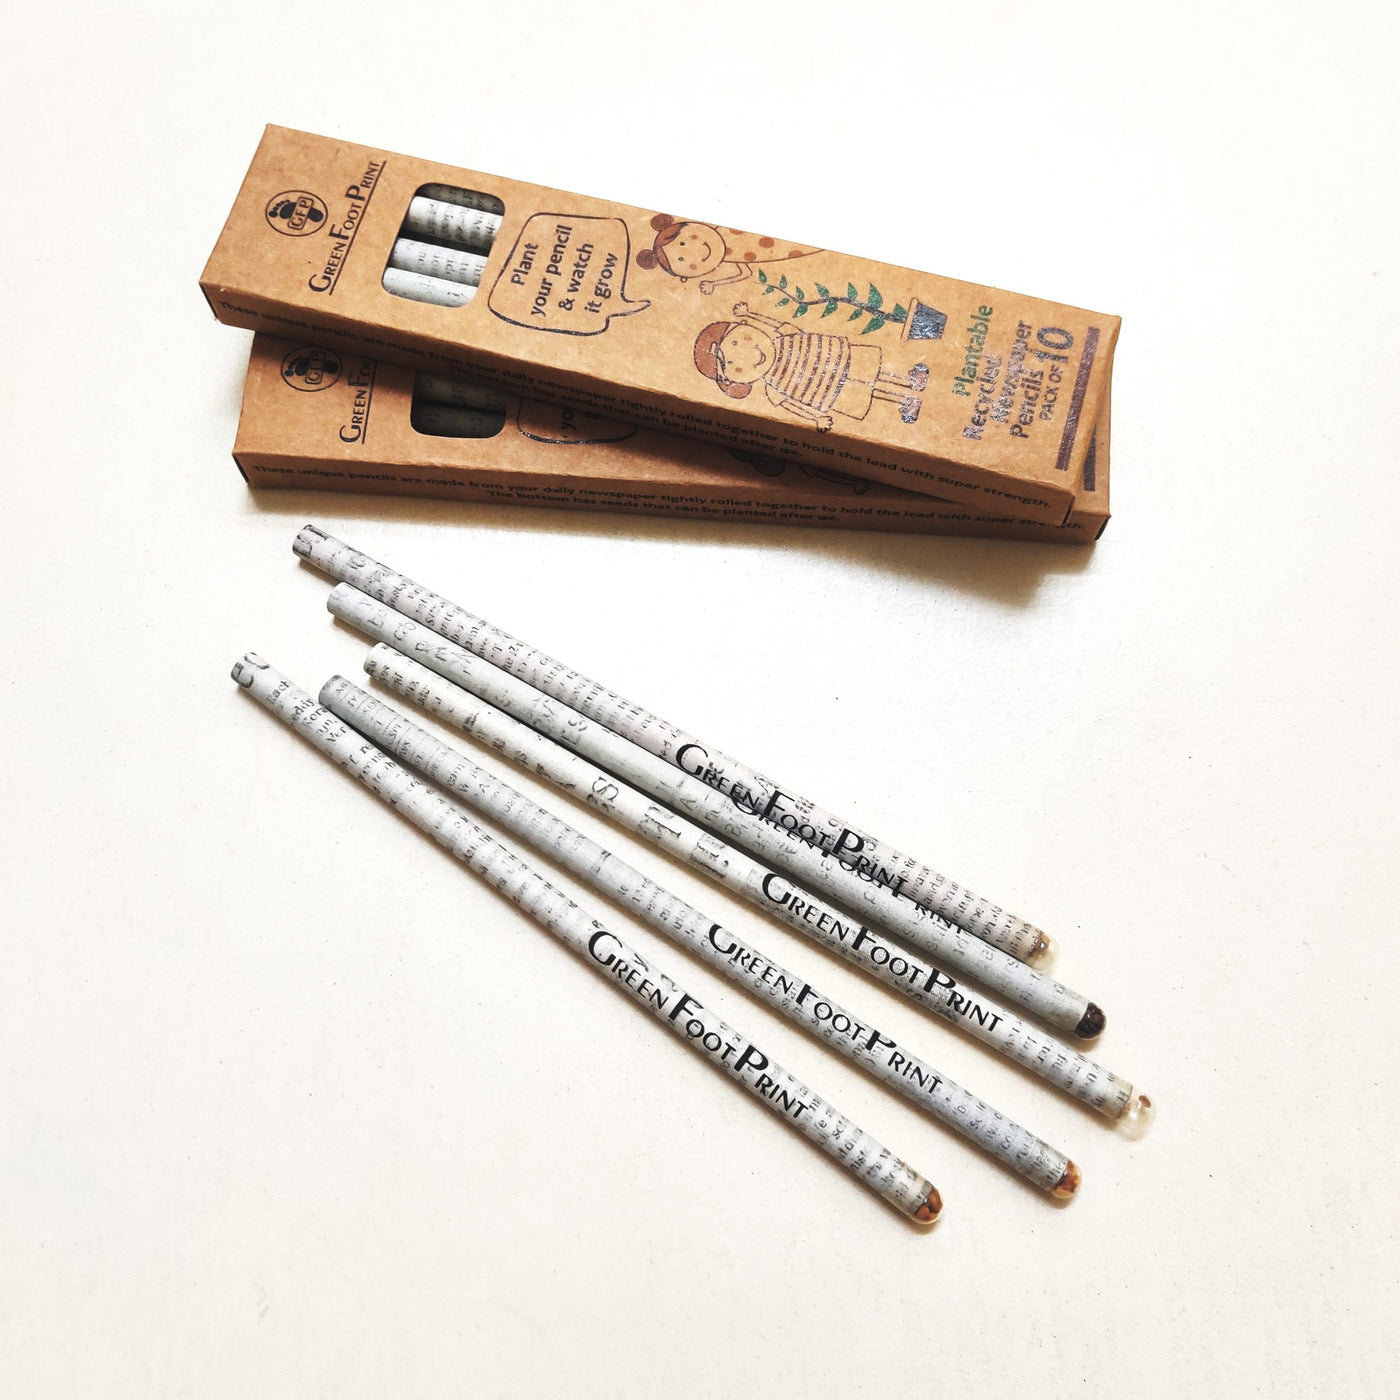 Plantable Recycled News paper Seed Pencils